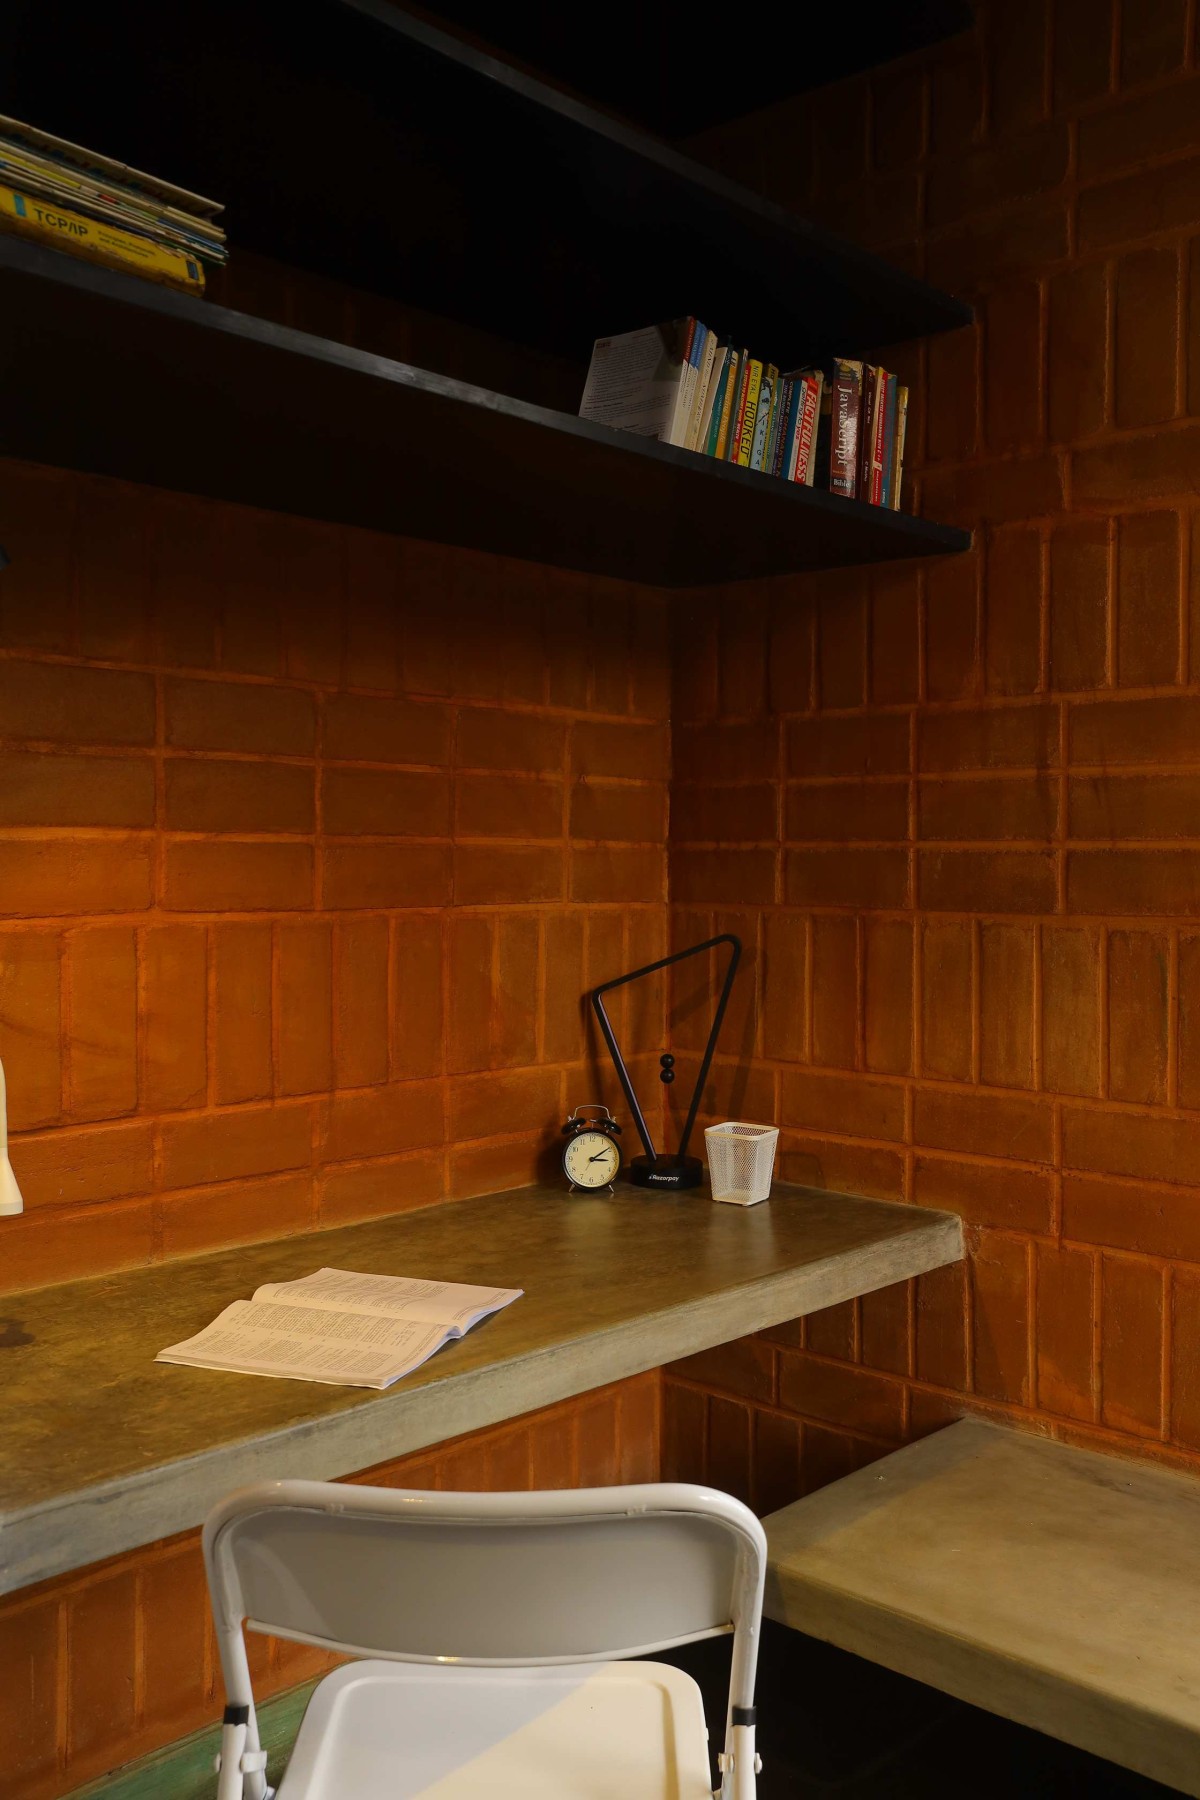 Study area of Aadhi Residence by RP Architects